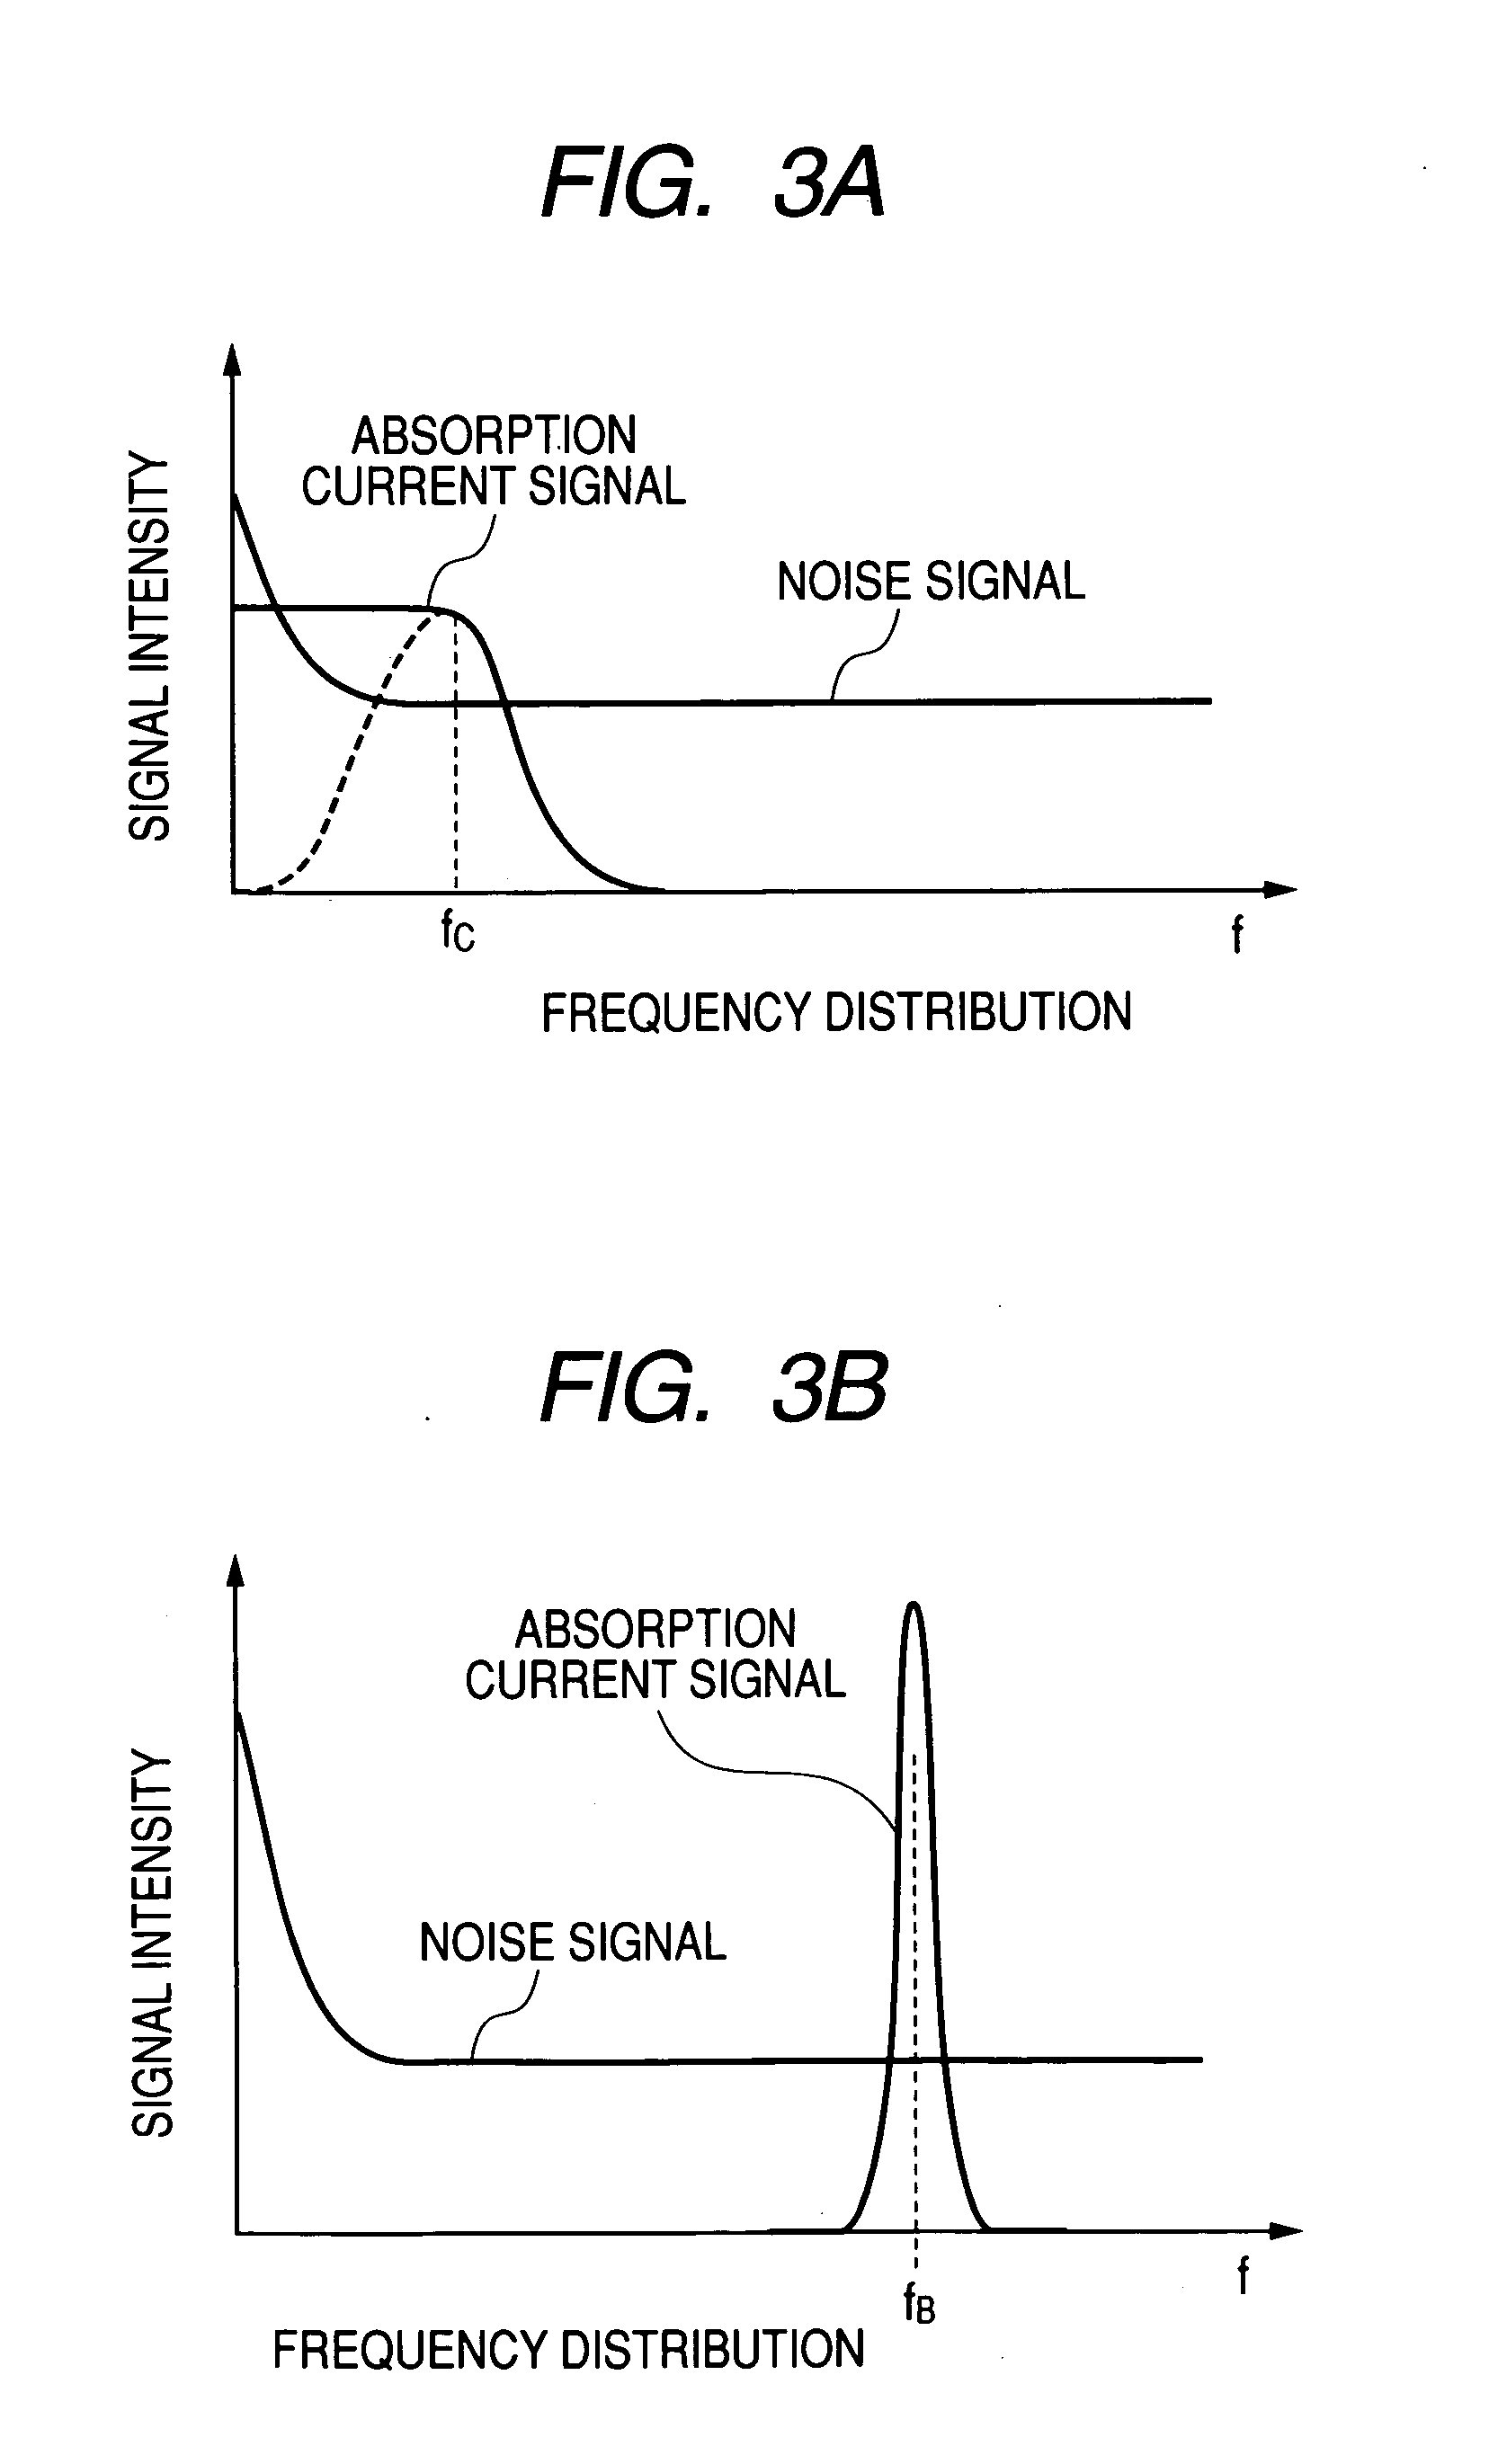 Absorption current image apparatus in electron microscope